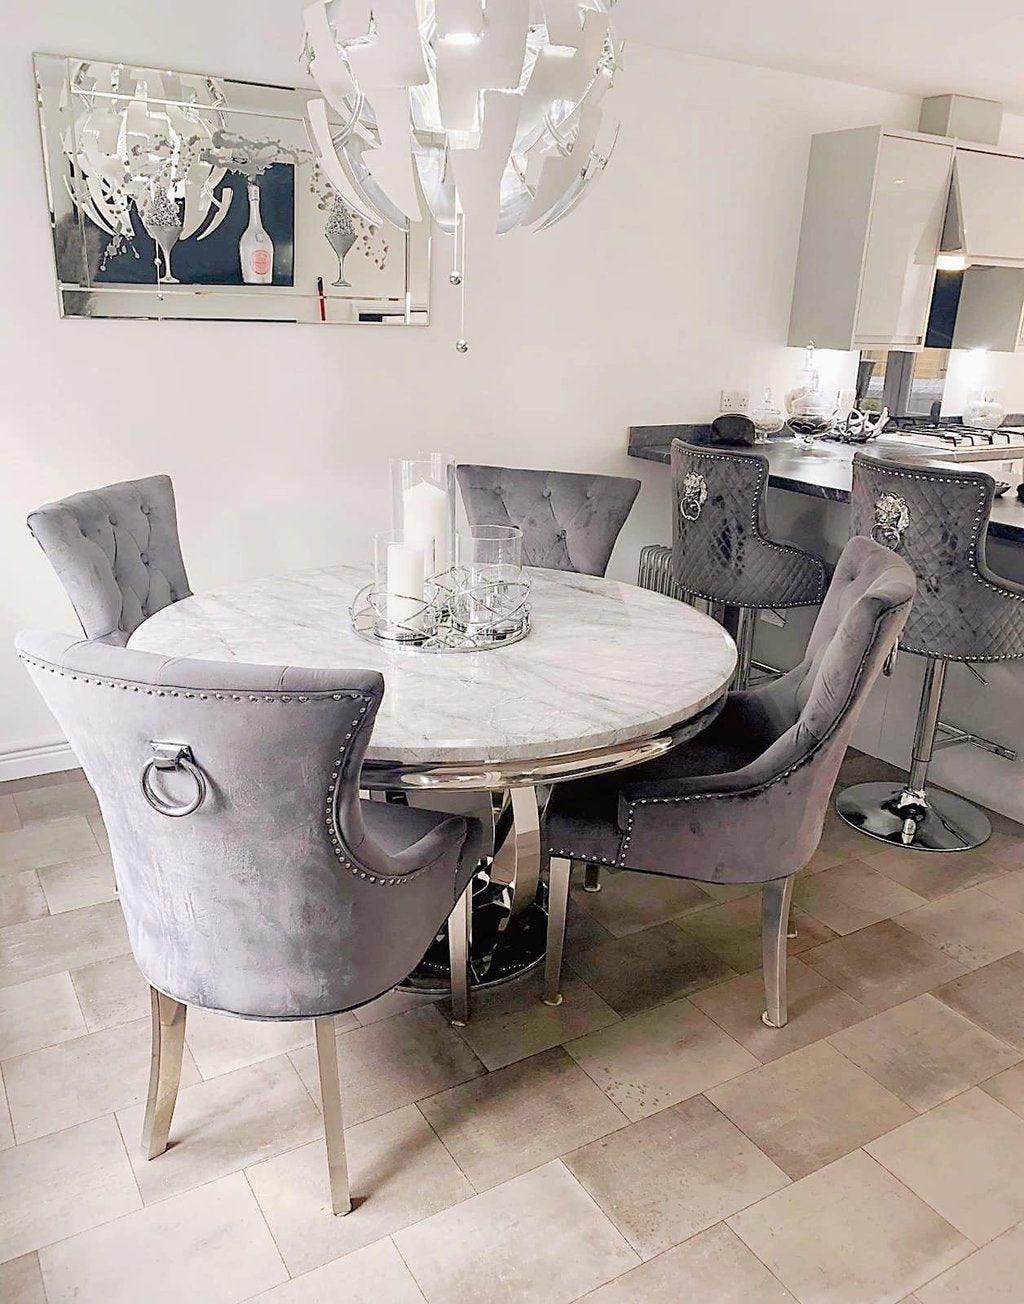 Chelsea 130cm Grey Marble Round Dining Table + Grey Ring Knocker Chairs-Esme Furnishings